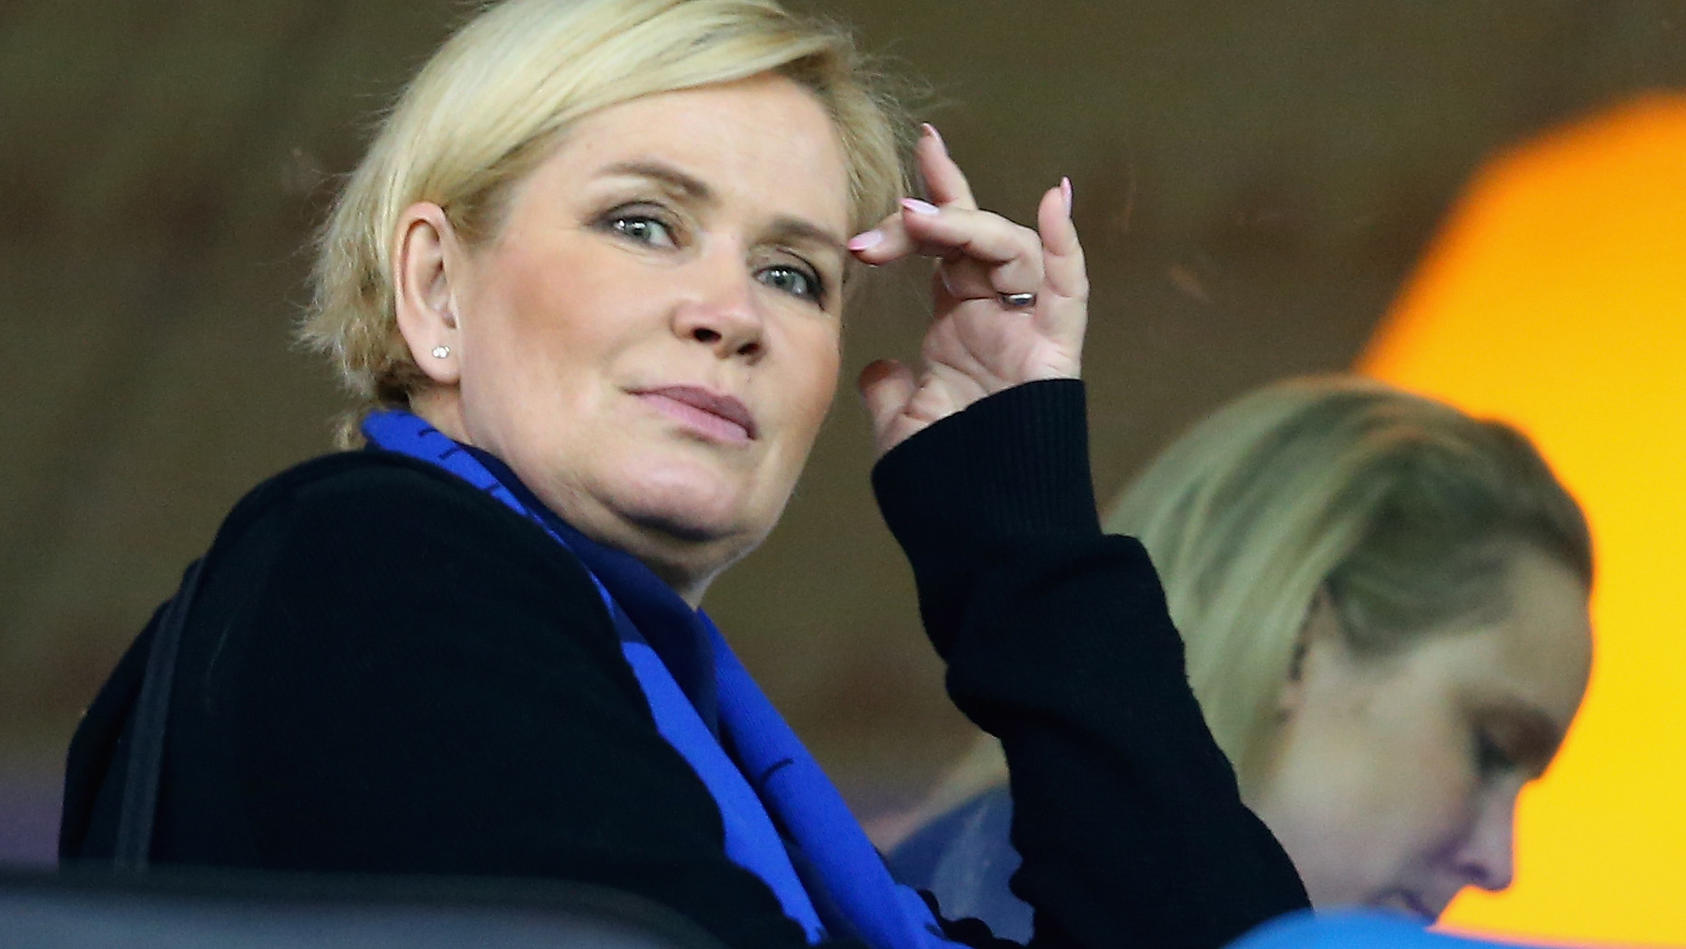 PADERBORN, GERMANY - FEBRUARY 26:  Claudia Effenberg looks on prior to the 2. Bundesliga match between SC Paderborn and RB Leipzig at Benteler Arena on February 26, 2016 in Paderborn, Germany.  (Photo by Christof Koepsel/Bongarts/Getty Images)